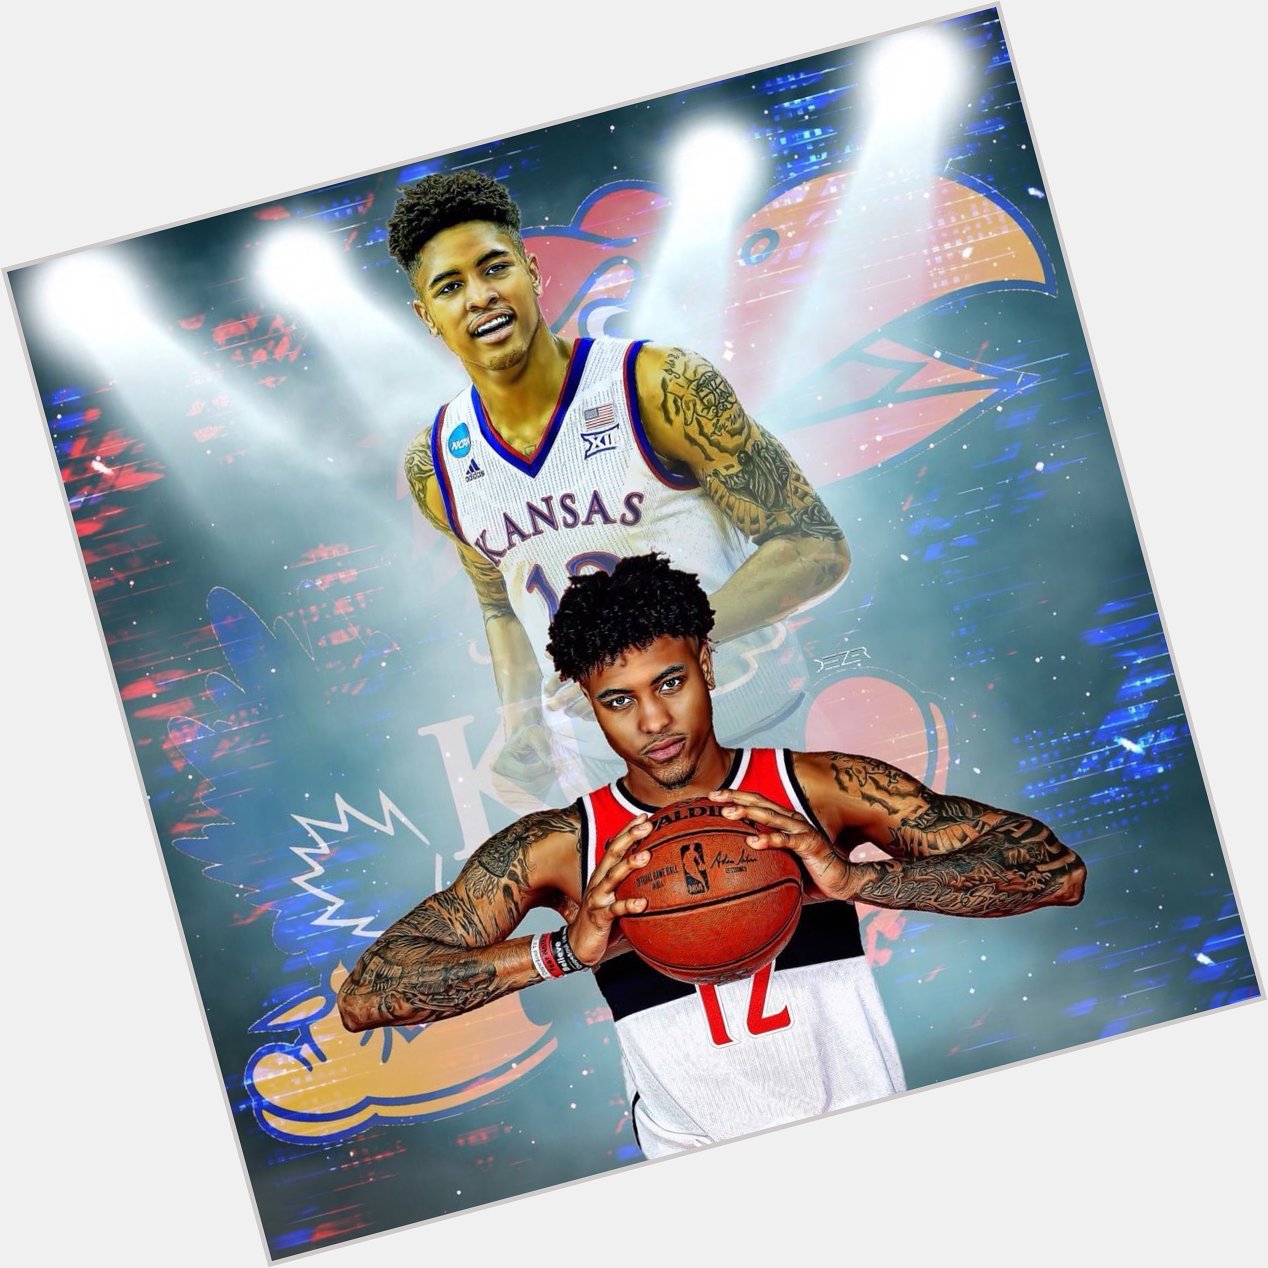 Happy Birthday to Kelly Oubre! 